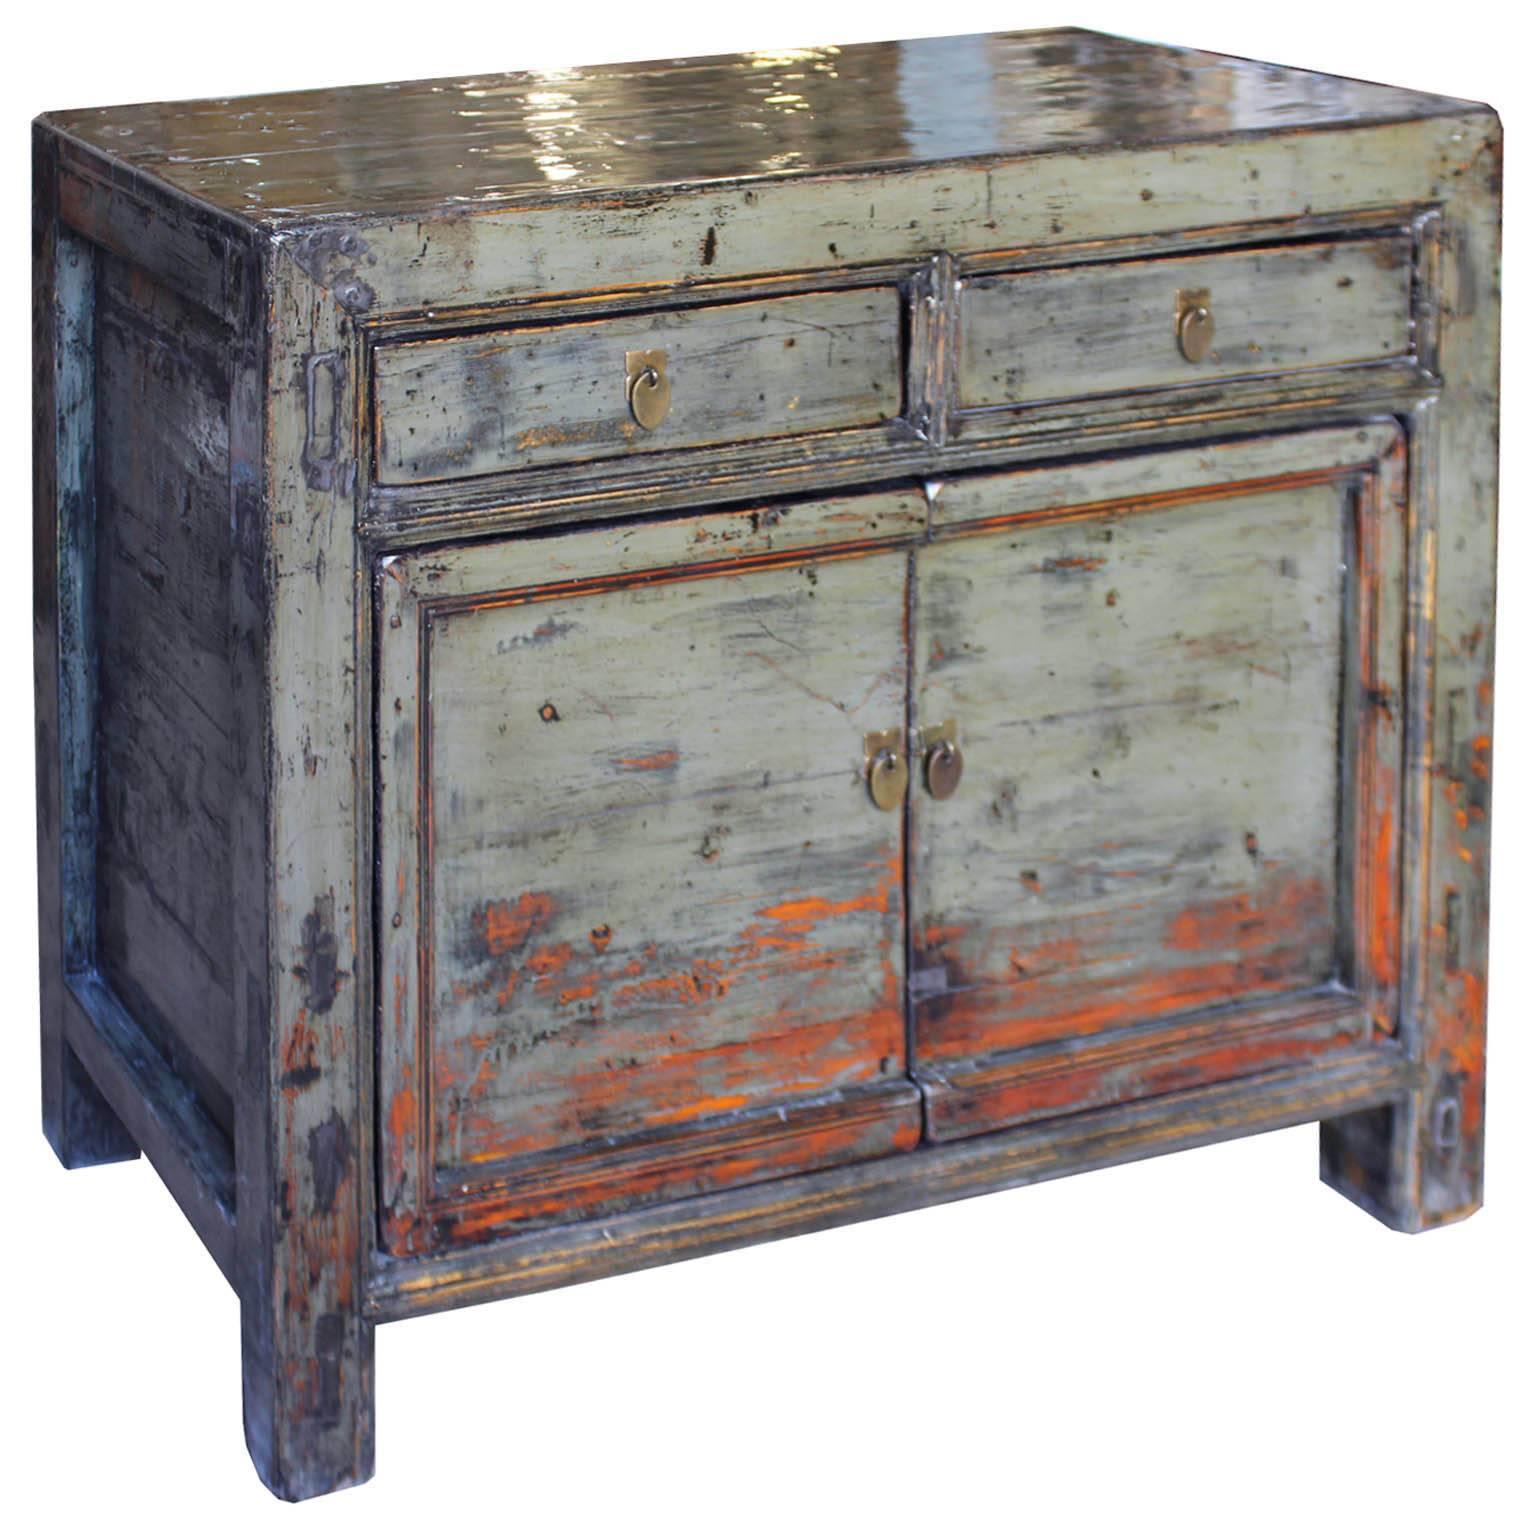 Gray lacquered chest with clean lines and orange highlights on the doors would make a statement at the end of a hallway or small entry way, Gansu, China. New hardware.